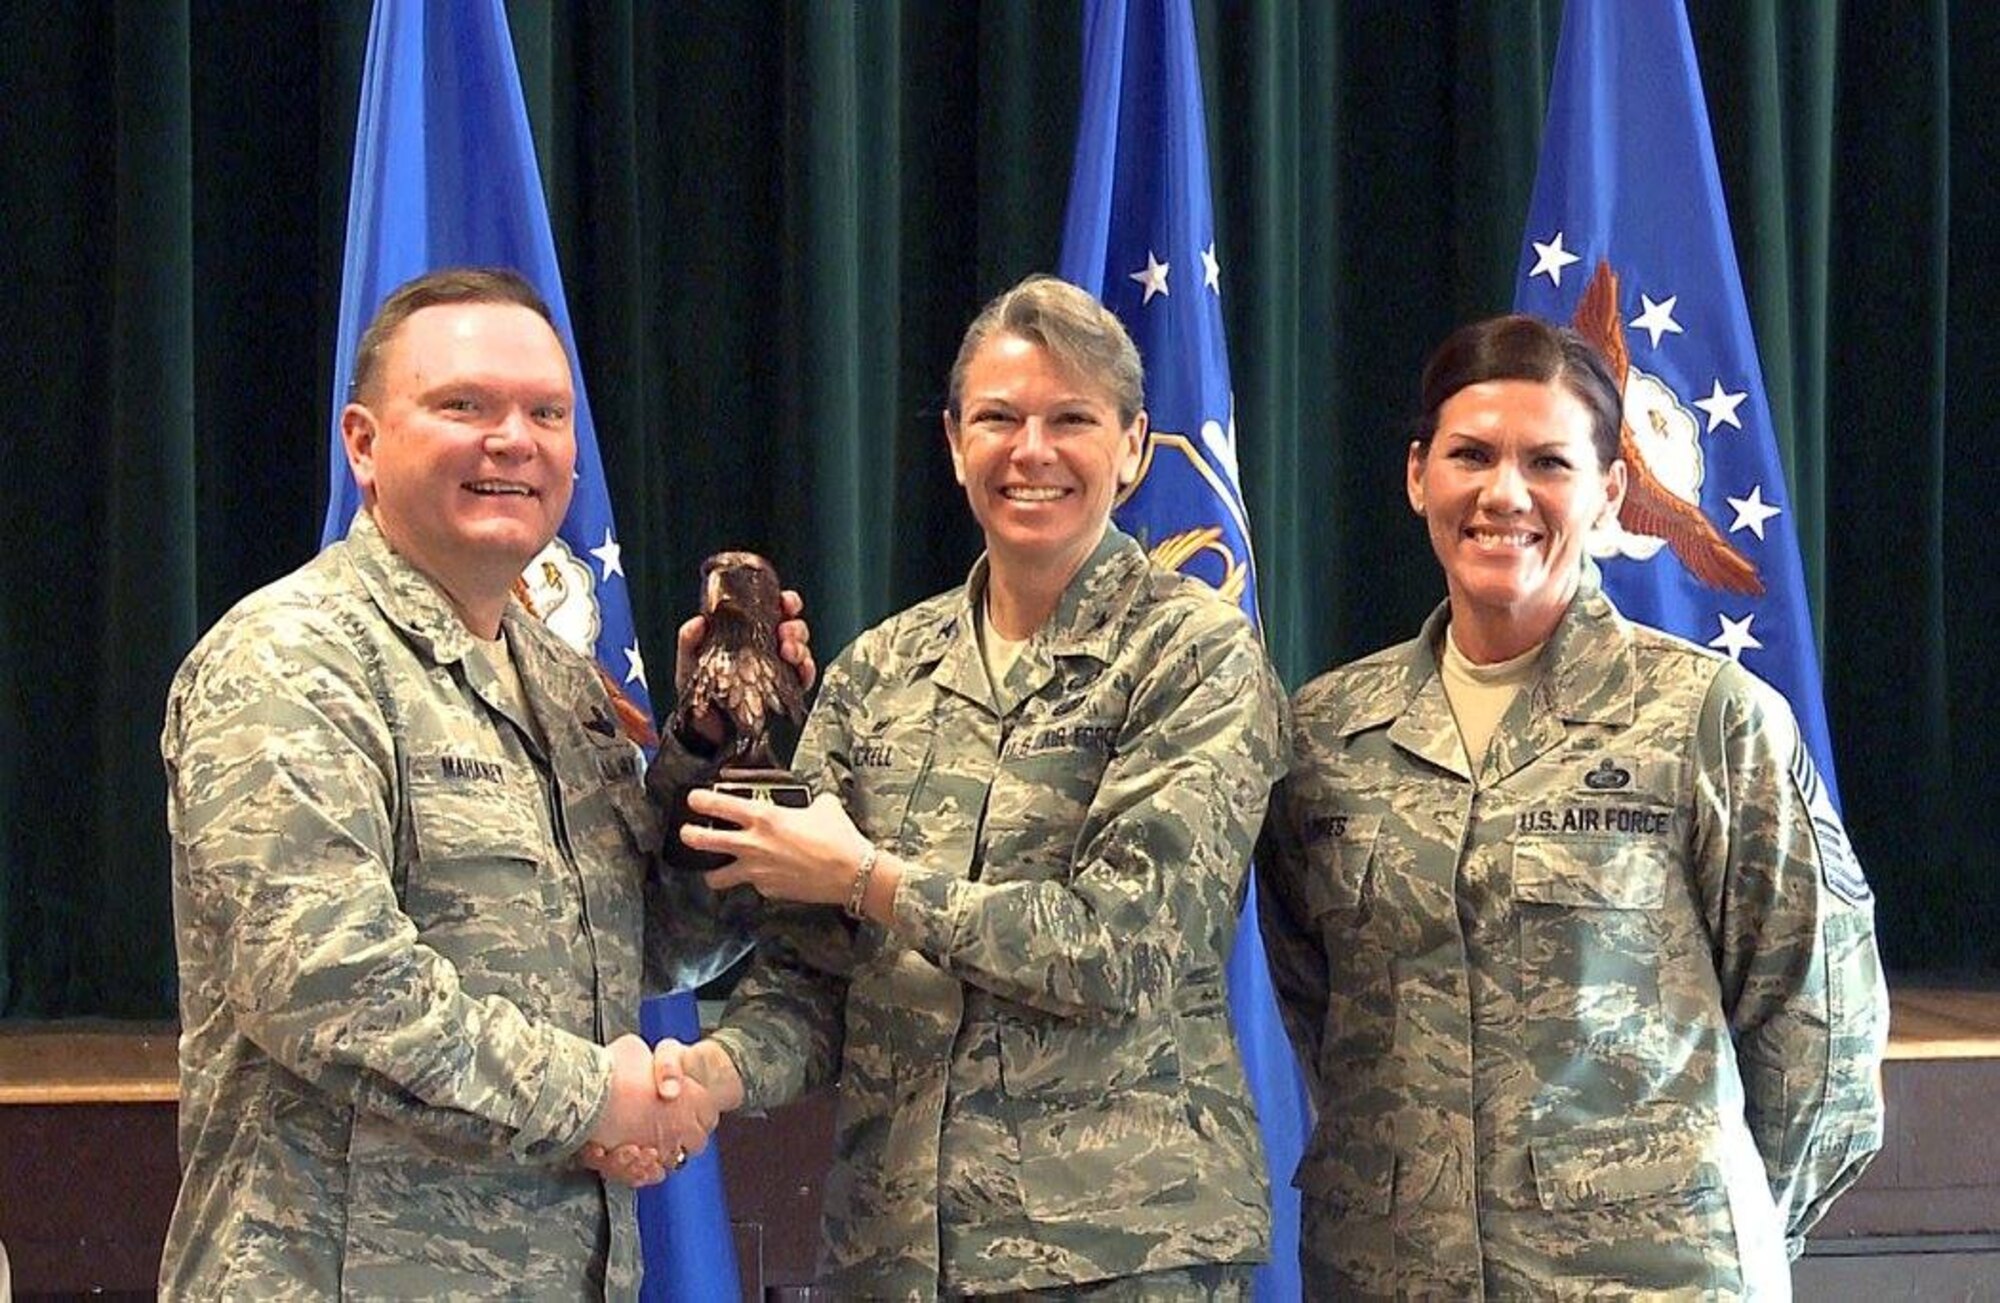 Brig. Gen. Samuel “Bo” Mahaney, Air Reserve Personnel Center commander, and Chief Master Sgt. Ruthe Flores, ARPC command chief, present the Category I, Non-Supervisory Civilian of the Year award to Col. Carolyn Stickell, Headquarters Individual Reservist Readiness and Integration Organization commander, who accepted the award on behalf of Francisco Rivera. Mahaney honored ARPC’s 2015 outstanding performers of the year Feb. 16, 2016, at the Heritage Eagle Bend Country Club in Aurora, Colo. (U.S. Air Force photo/Quinn Jacobson)